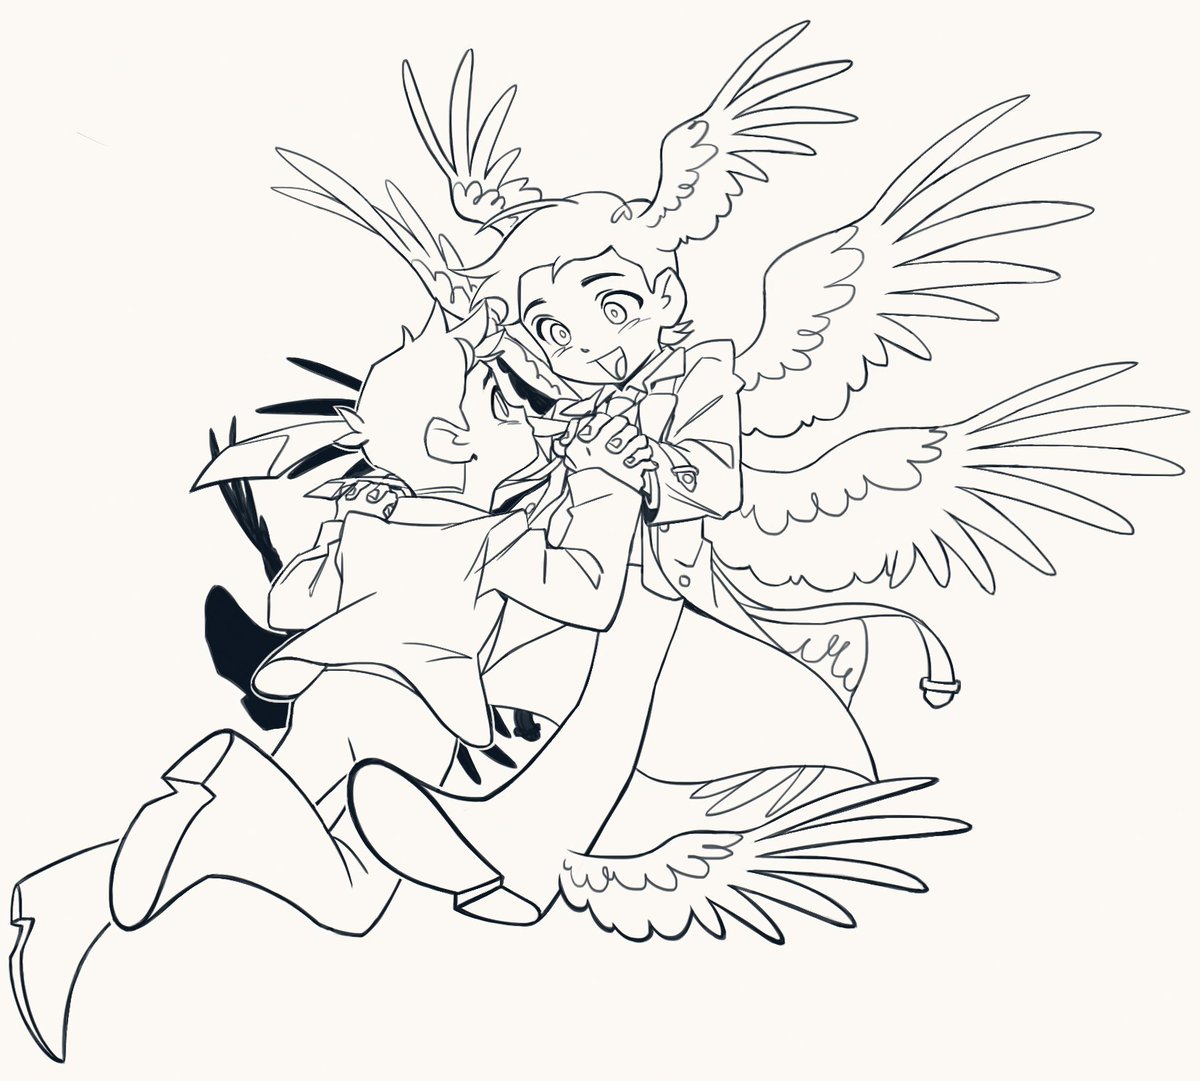 the line art bc it was grueling af 